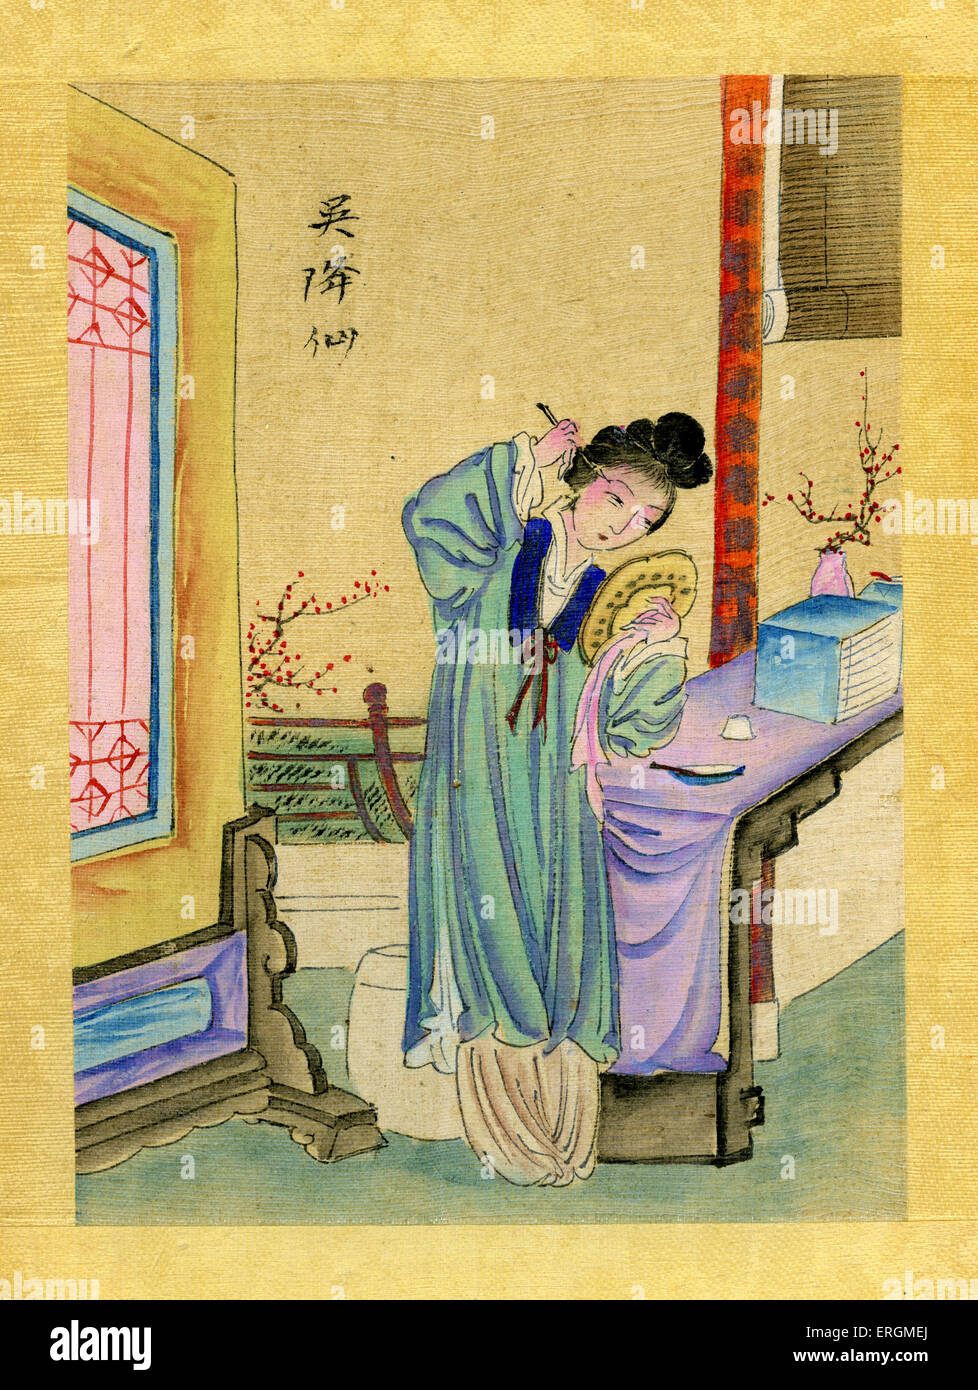 Wu Chiang-Hsien/ Consort Xiao. Imperial consort/concubine of Emperor Yang of Sui (569- 618). From a Chinese handpainted album on silk, c. late 19th century. Stock Photo